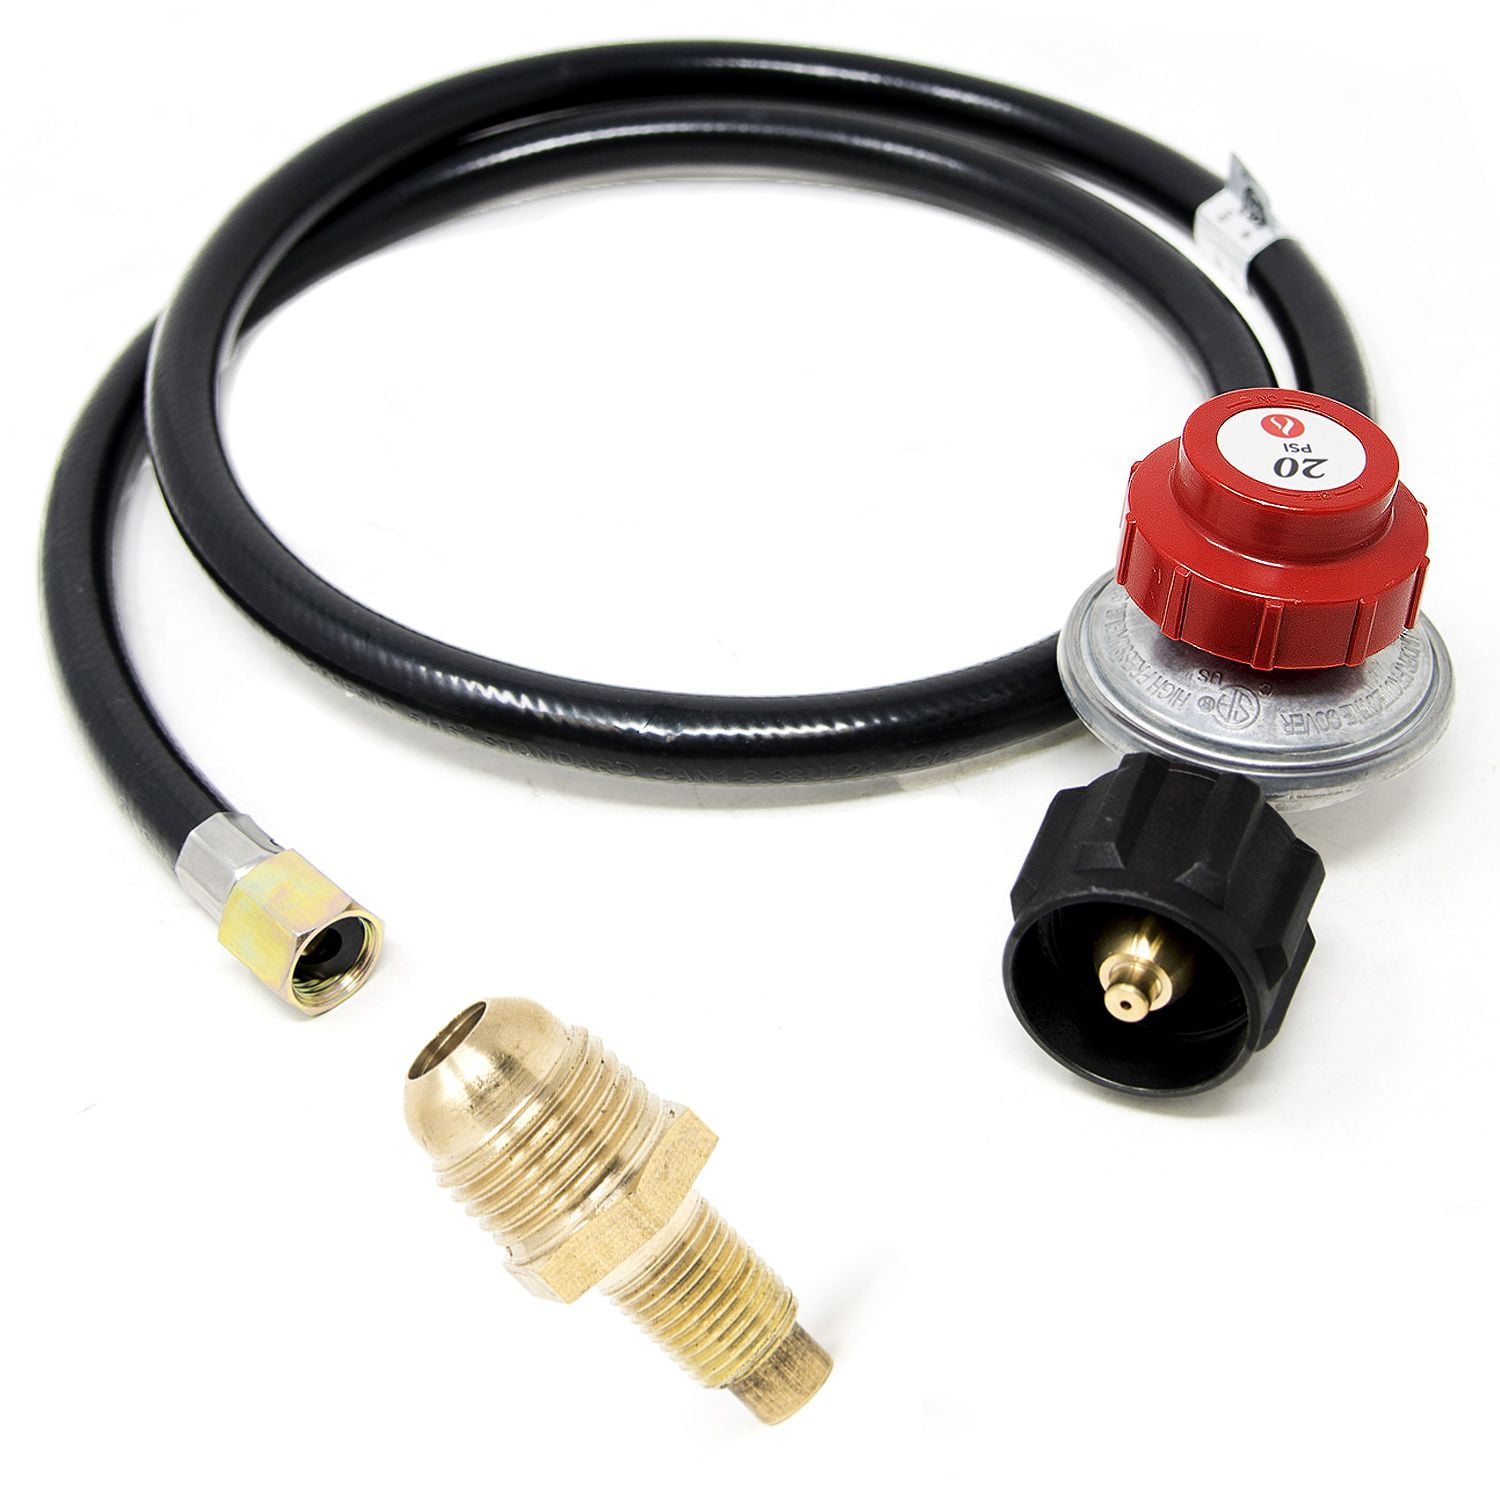 37mb Propane Gas Regulator With Pressure Gauge & 2 M Hose Kit With 2 Clips 37mbar POL